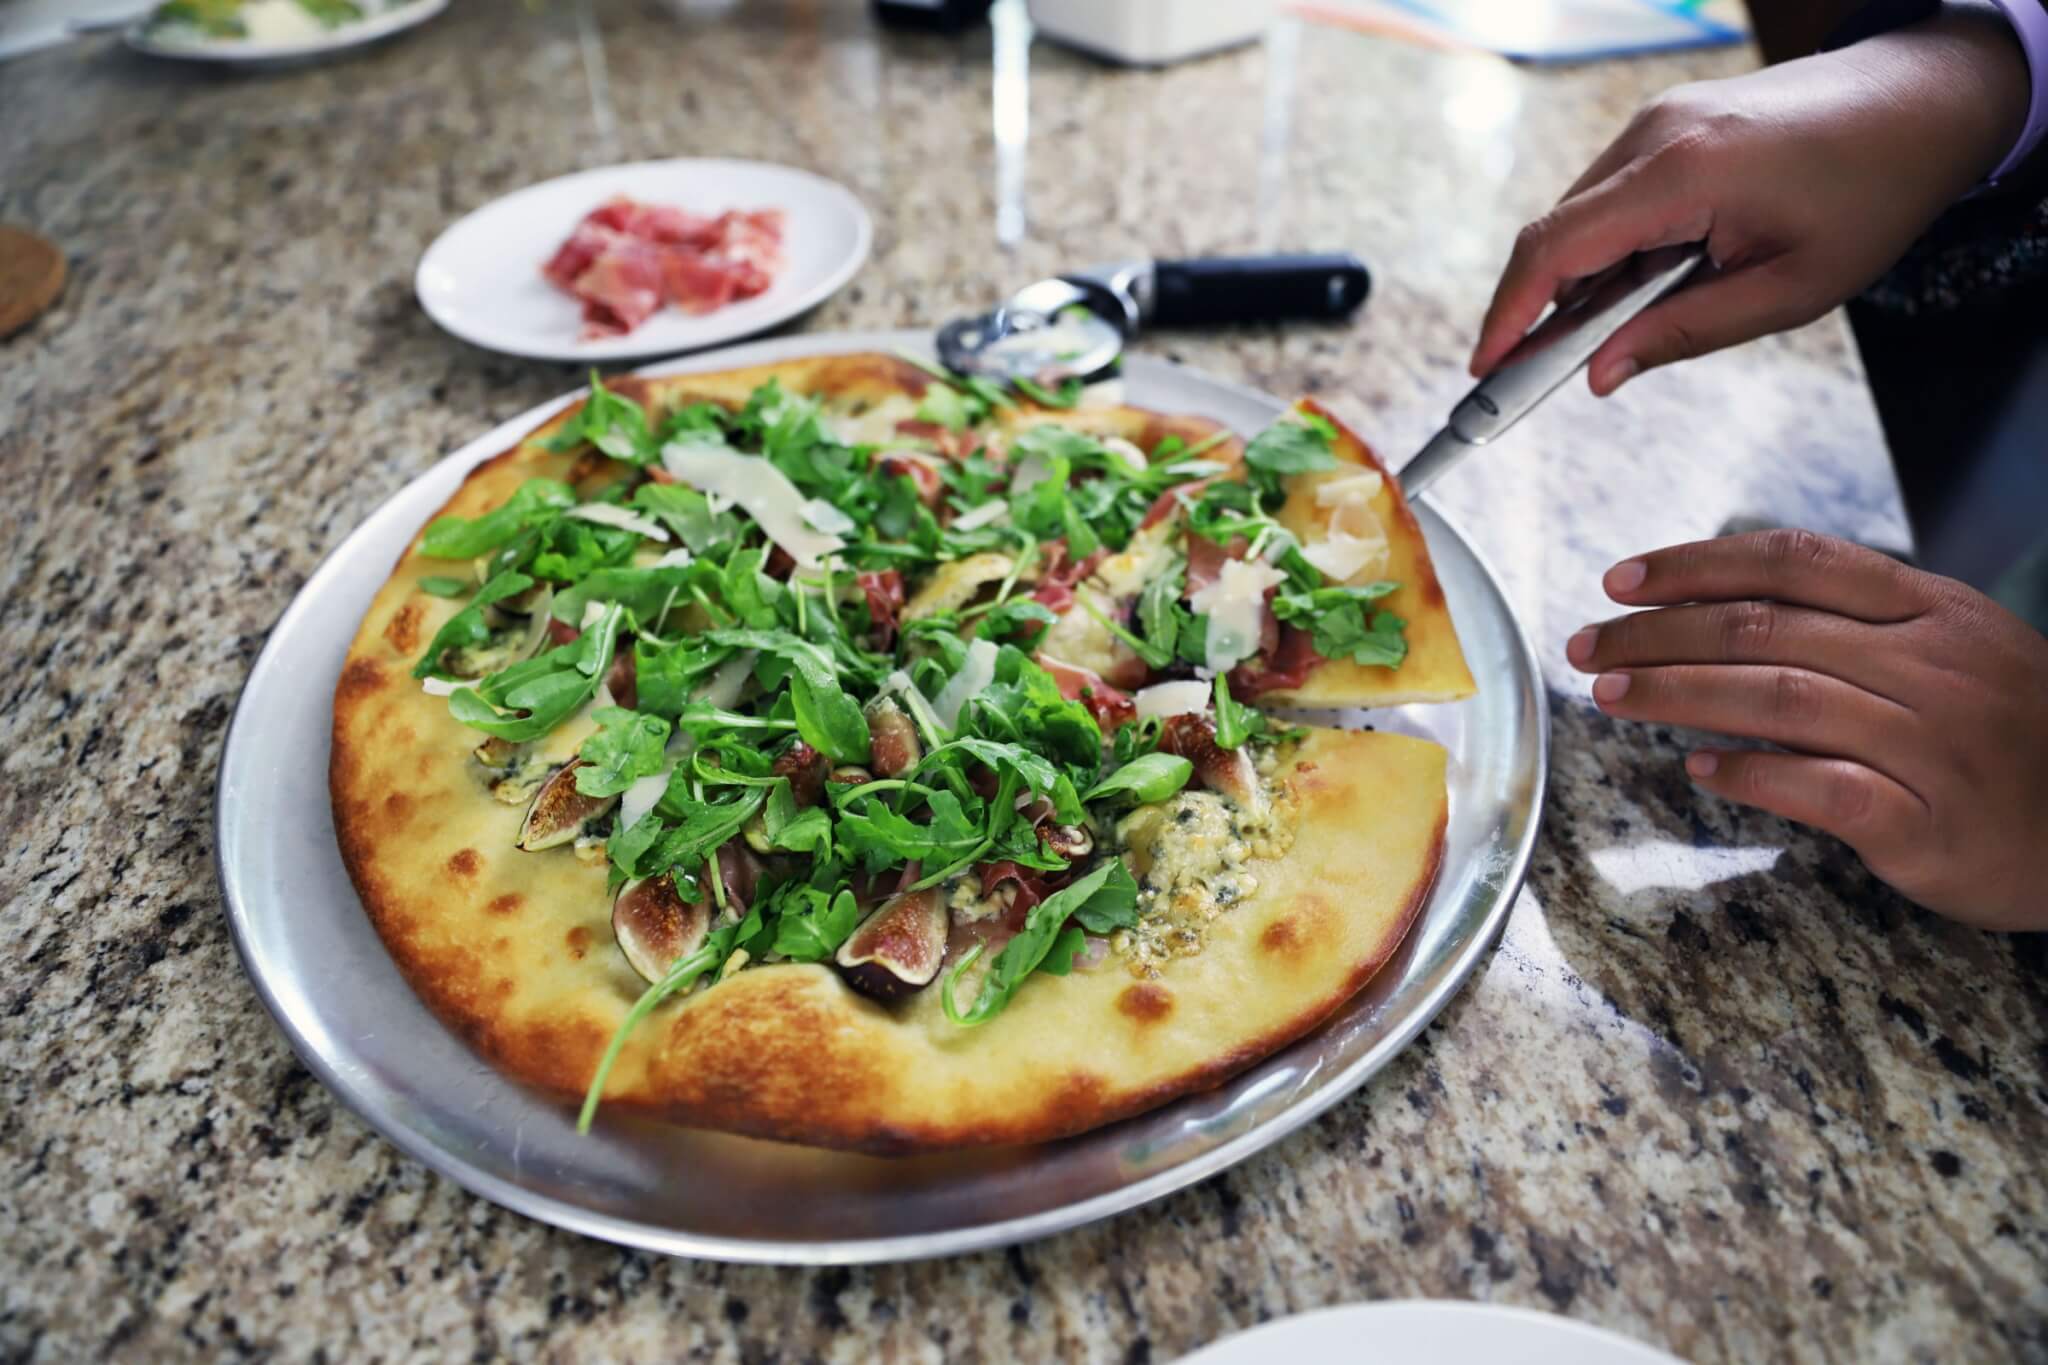 fig and prosciutto pizza with arugula salad and lemon vinaigrette, topped with shaved parmesan cheese